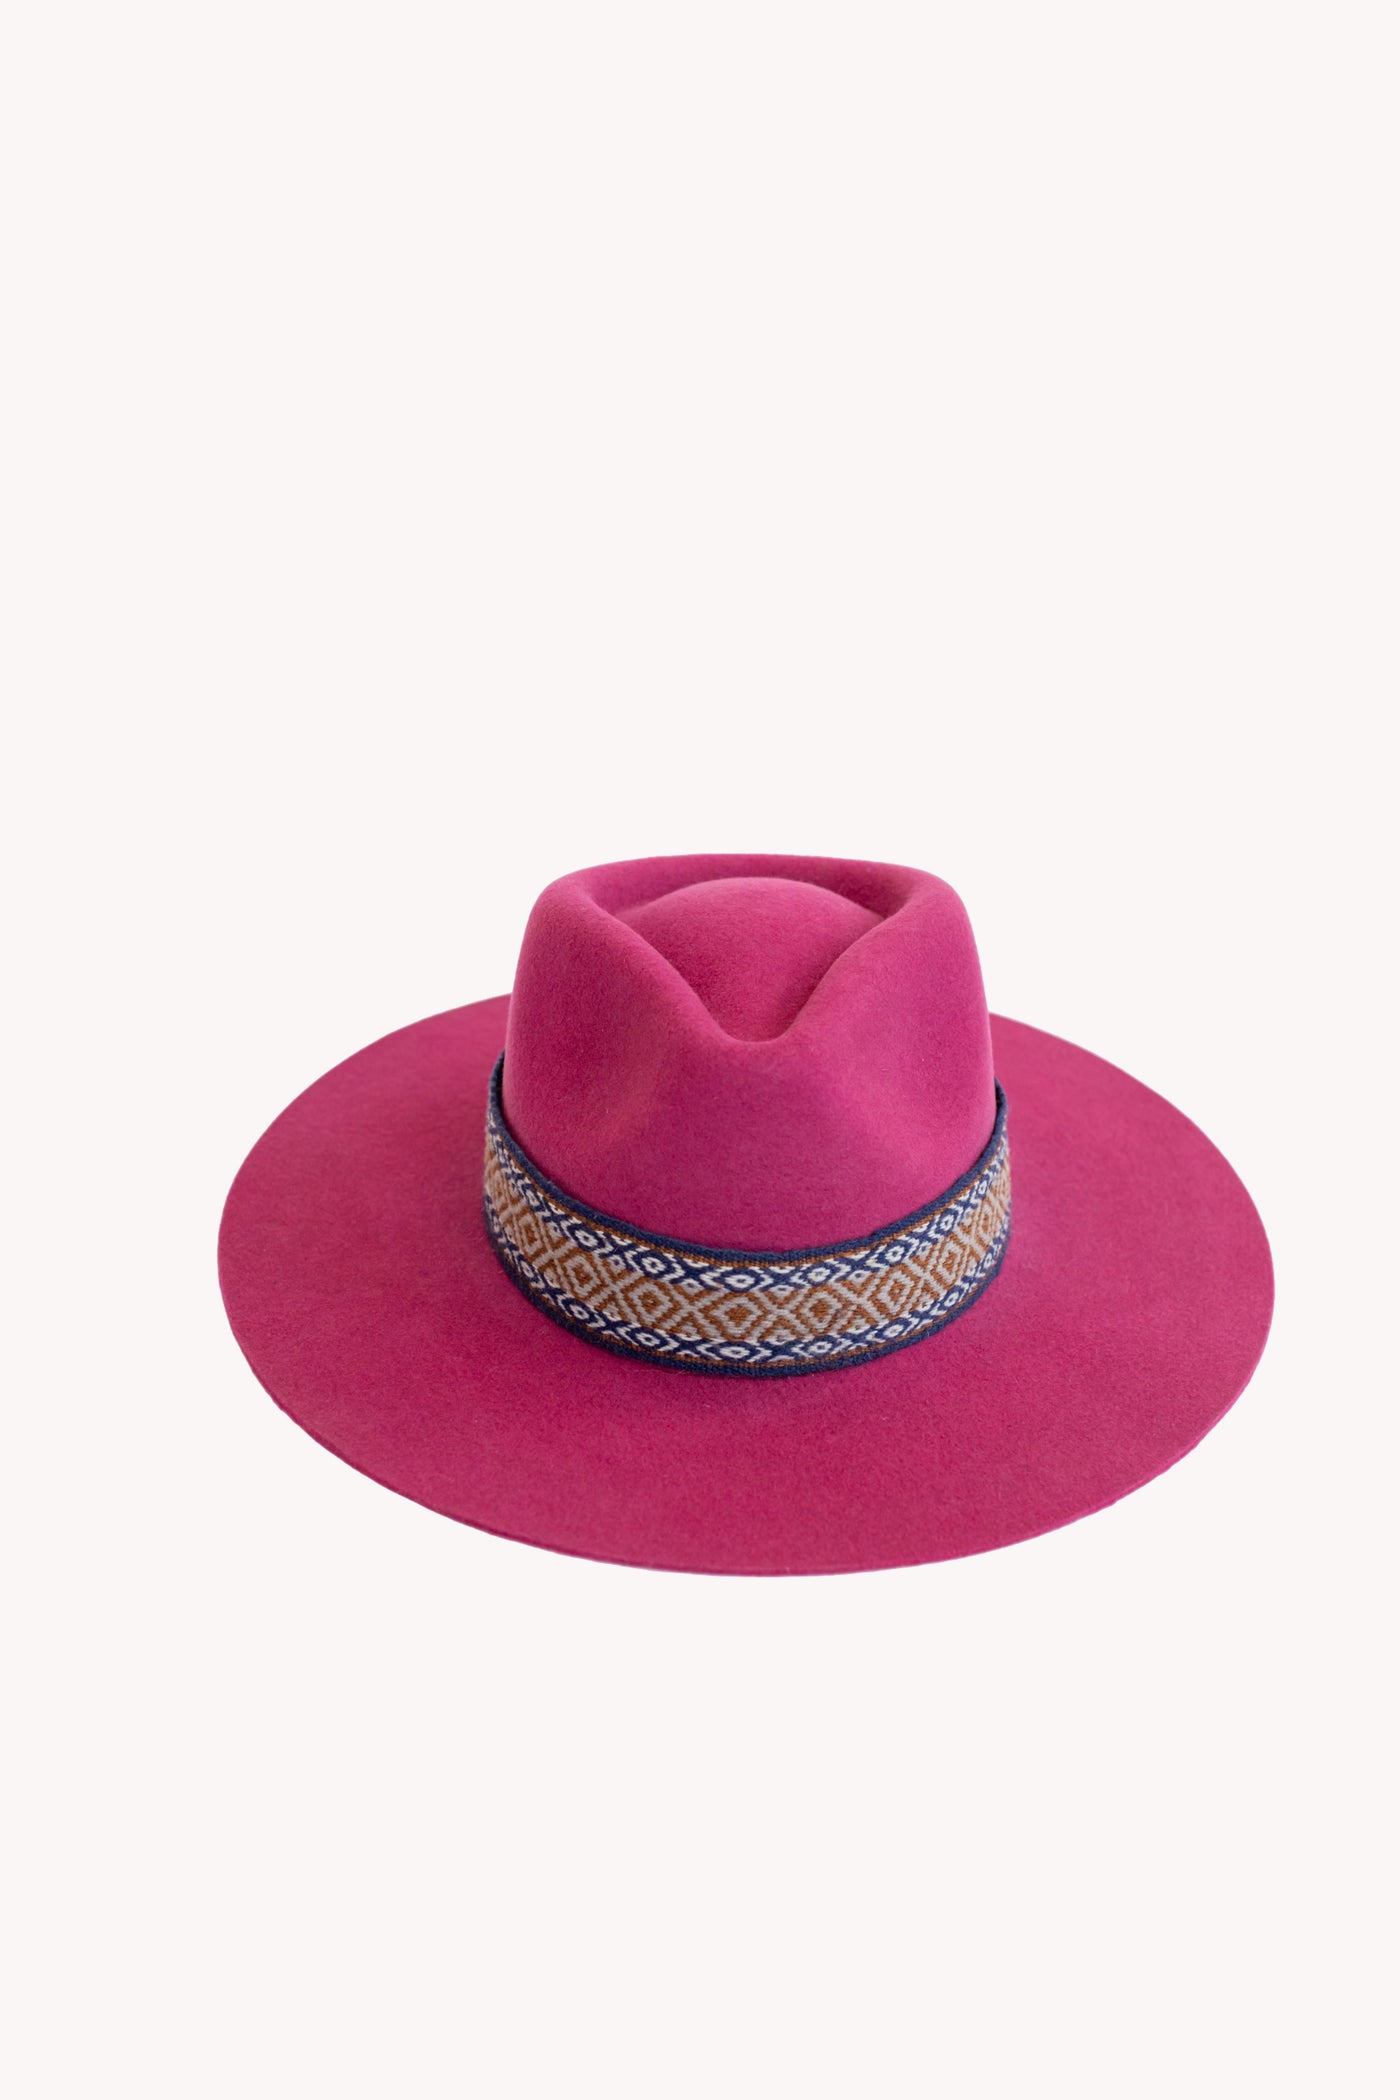 Pink western style hat